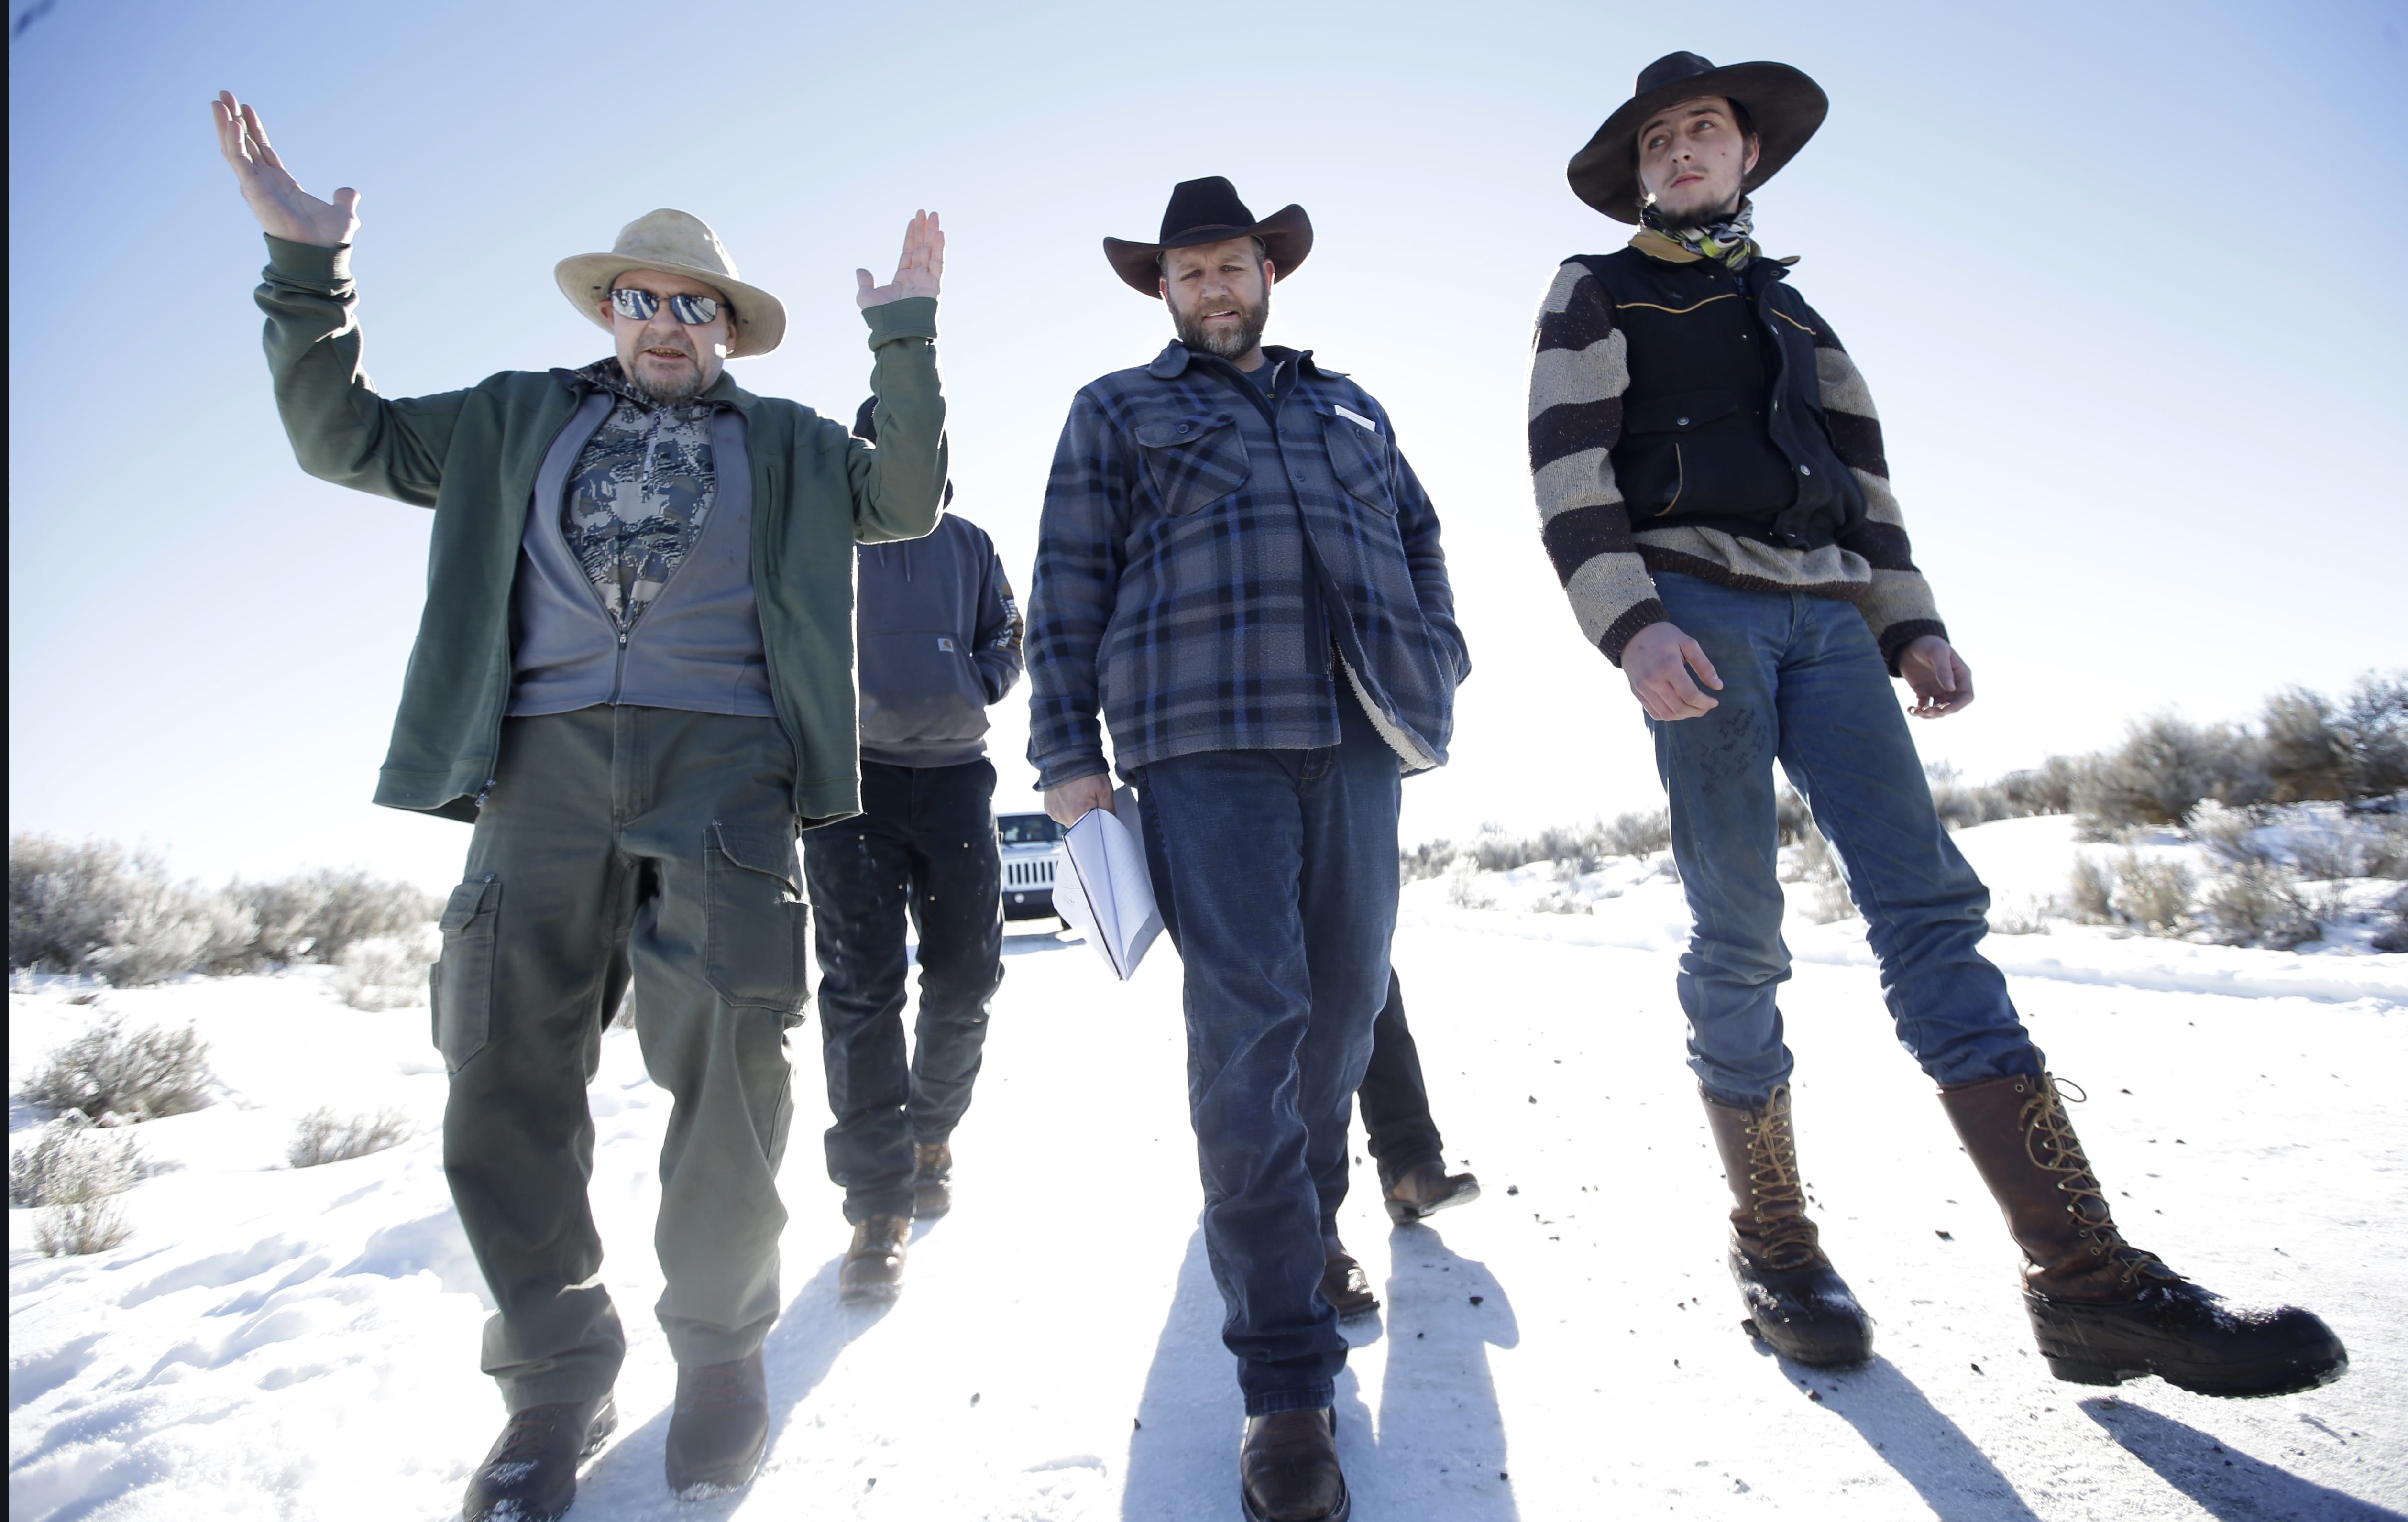 Burns resident Steve Atkins, left, talks with Ammon Bundy, center, one of the sons of Nevada rancher Cliven Bundy, following a news conference at Malheur National Wildlife Refuge near Burns, Ore., on Jan 8.